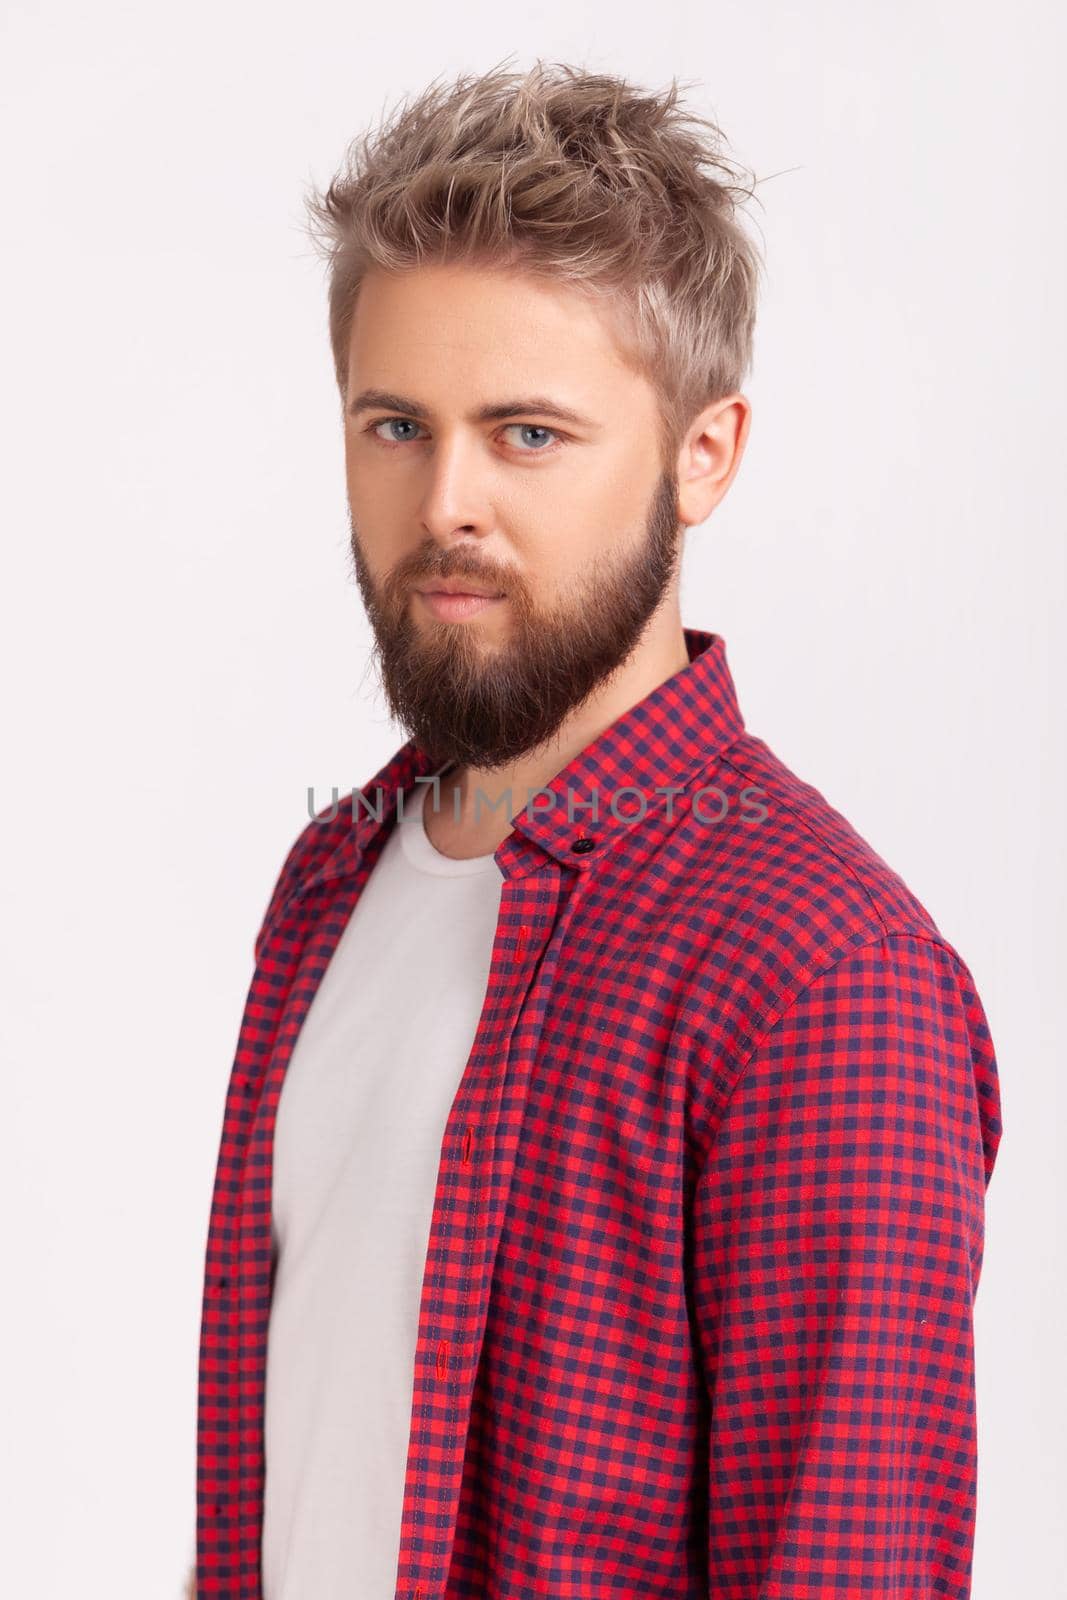 Portrait of young self-assured bearded man in plaid t-shirt confidently looking at camera, pick-up tricks by Khosro1